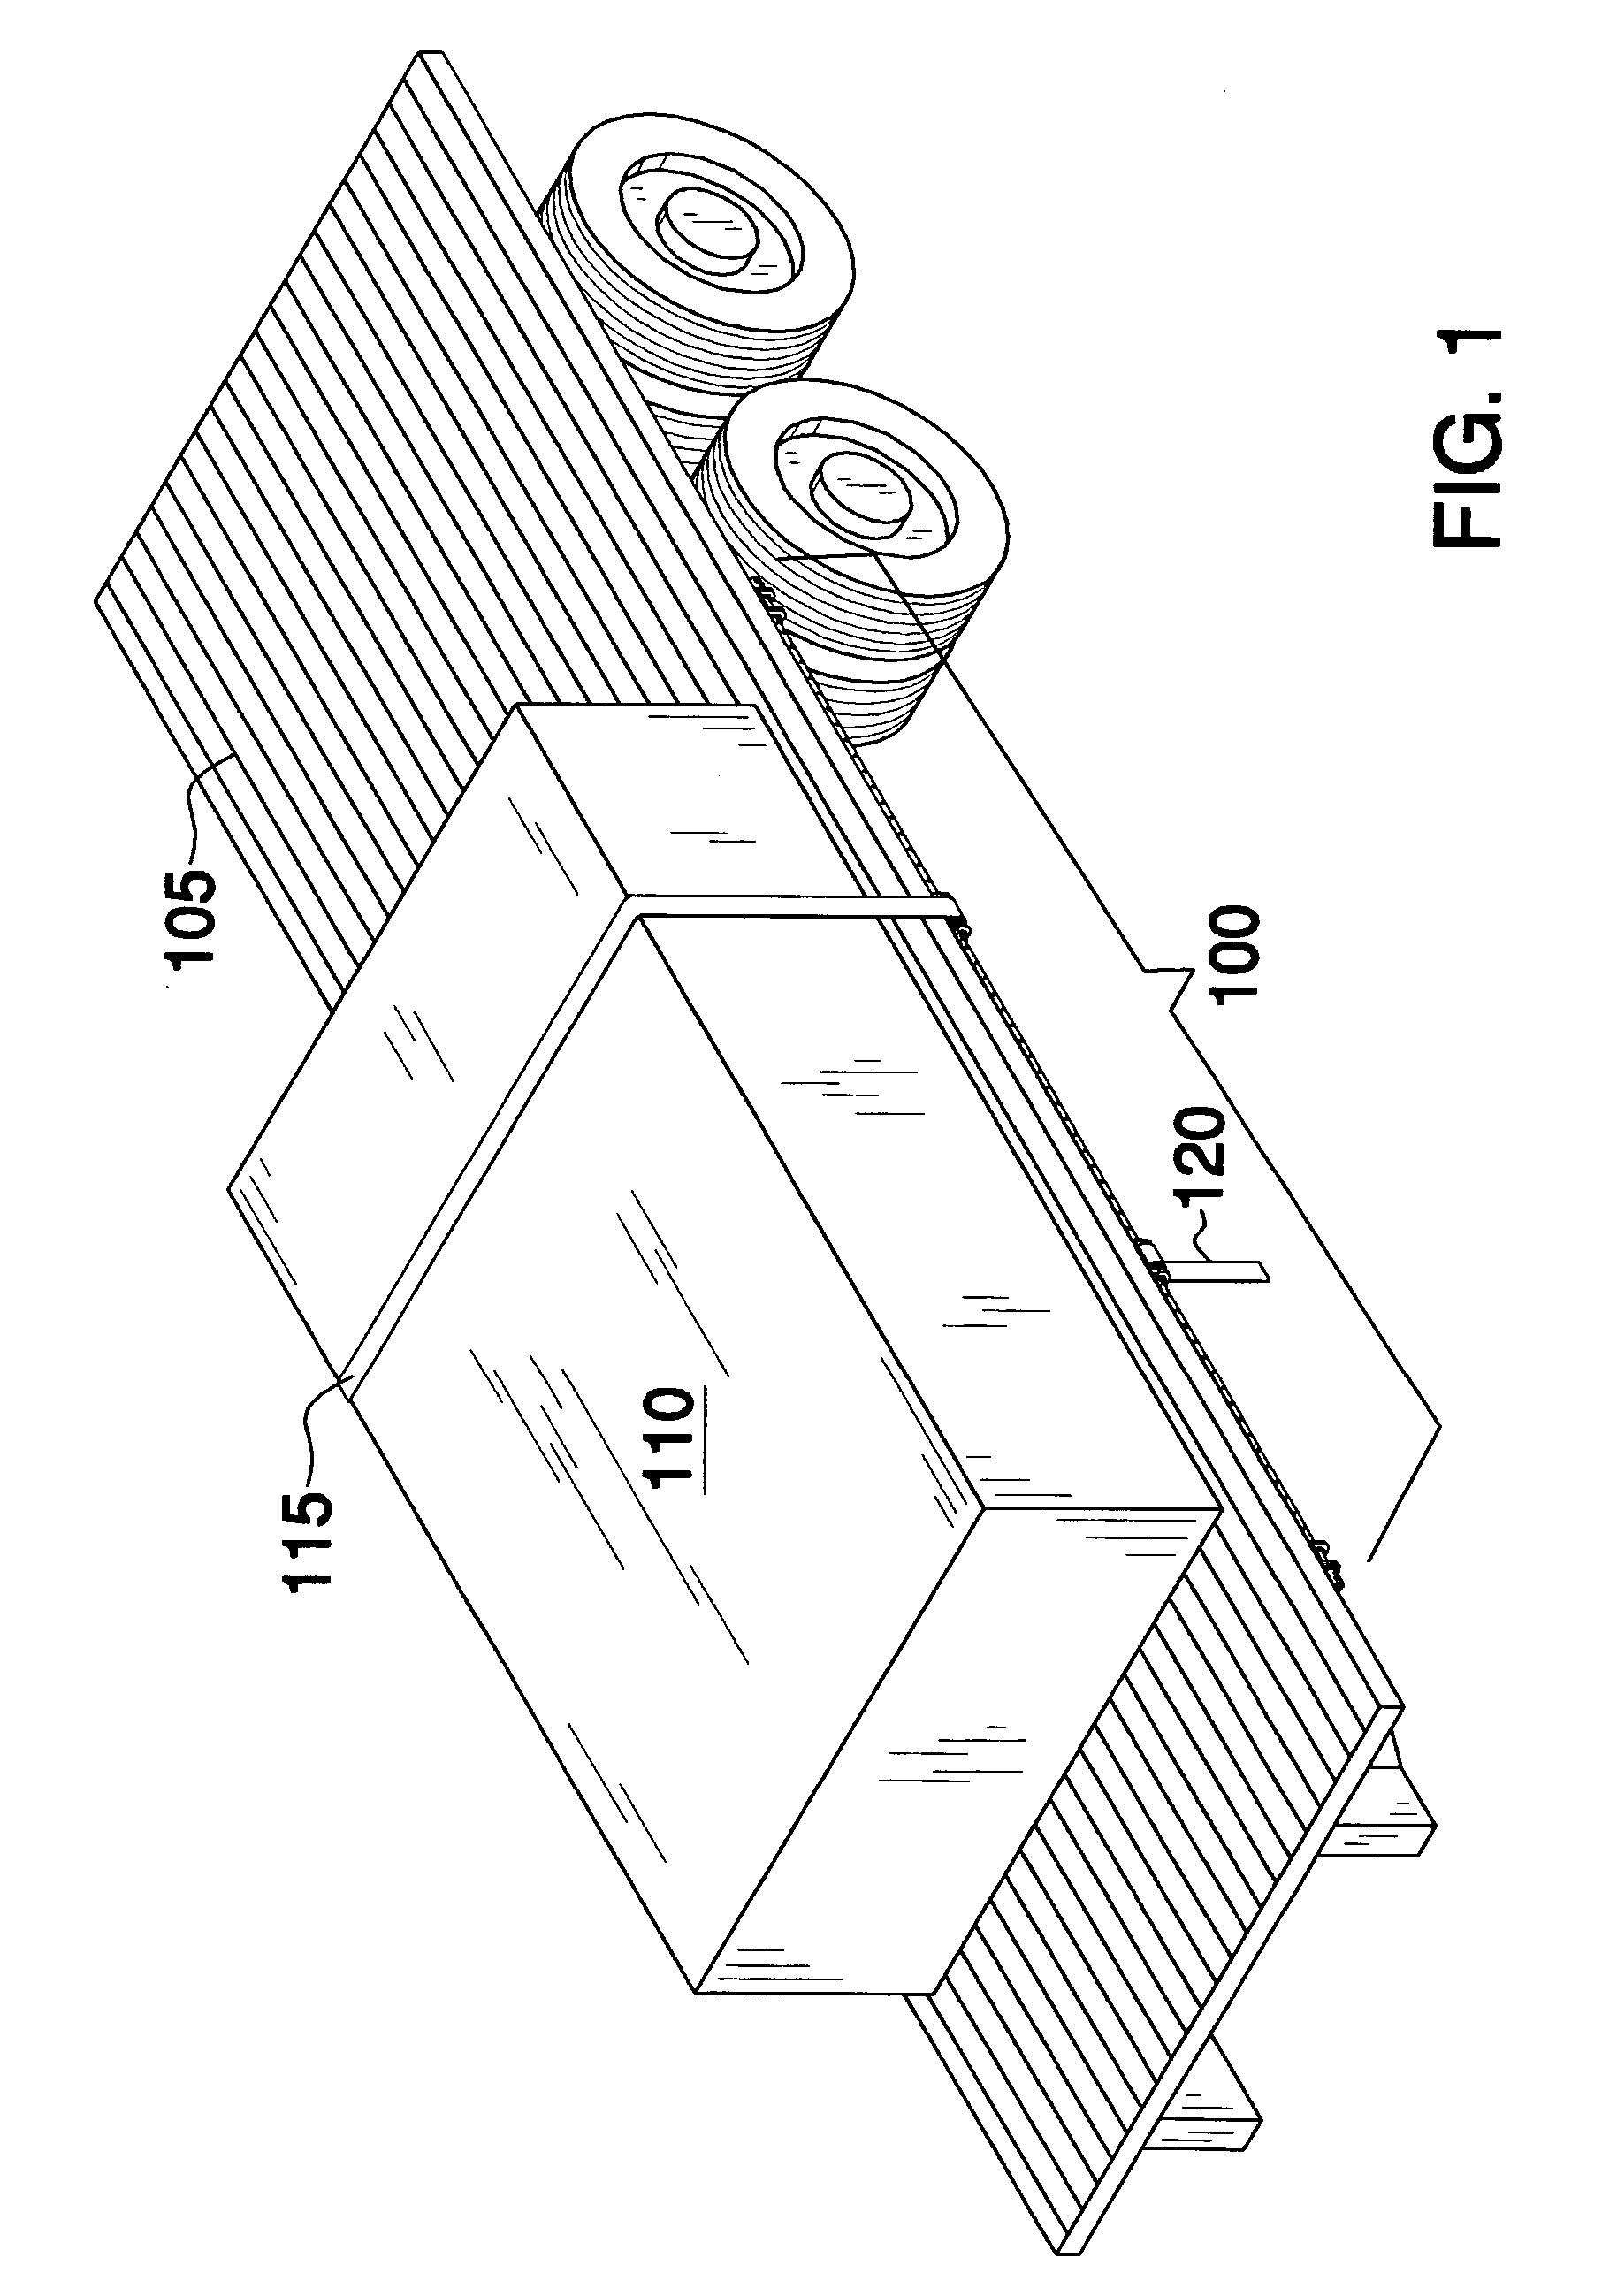 Automated system for securing a load to a flatbed truck